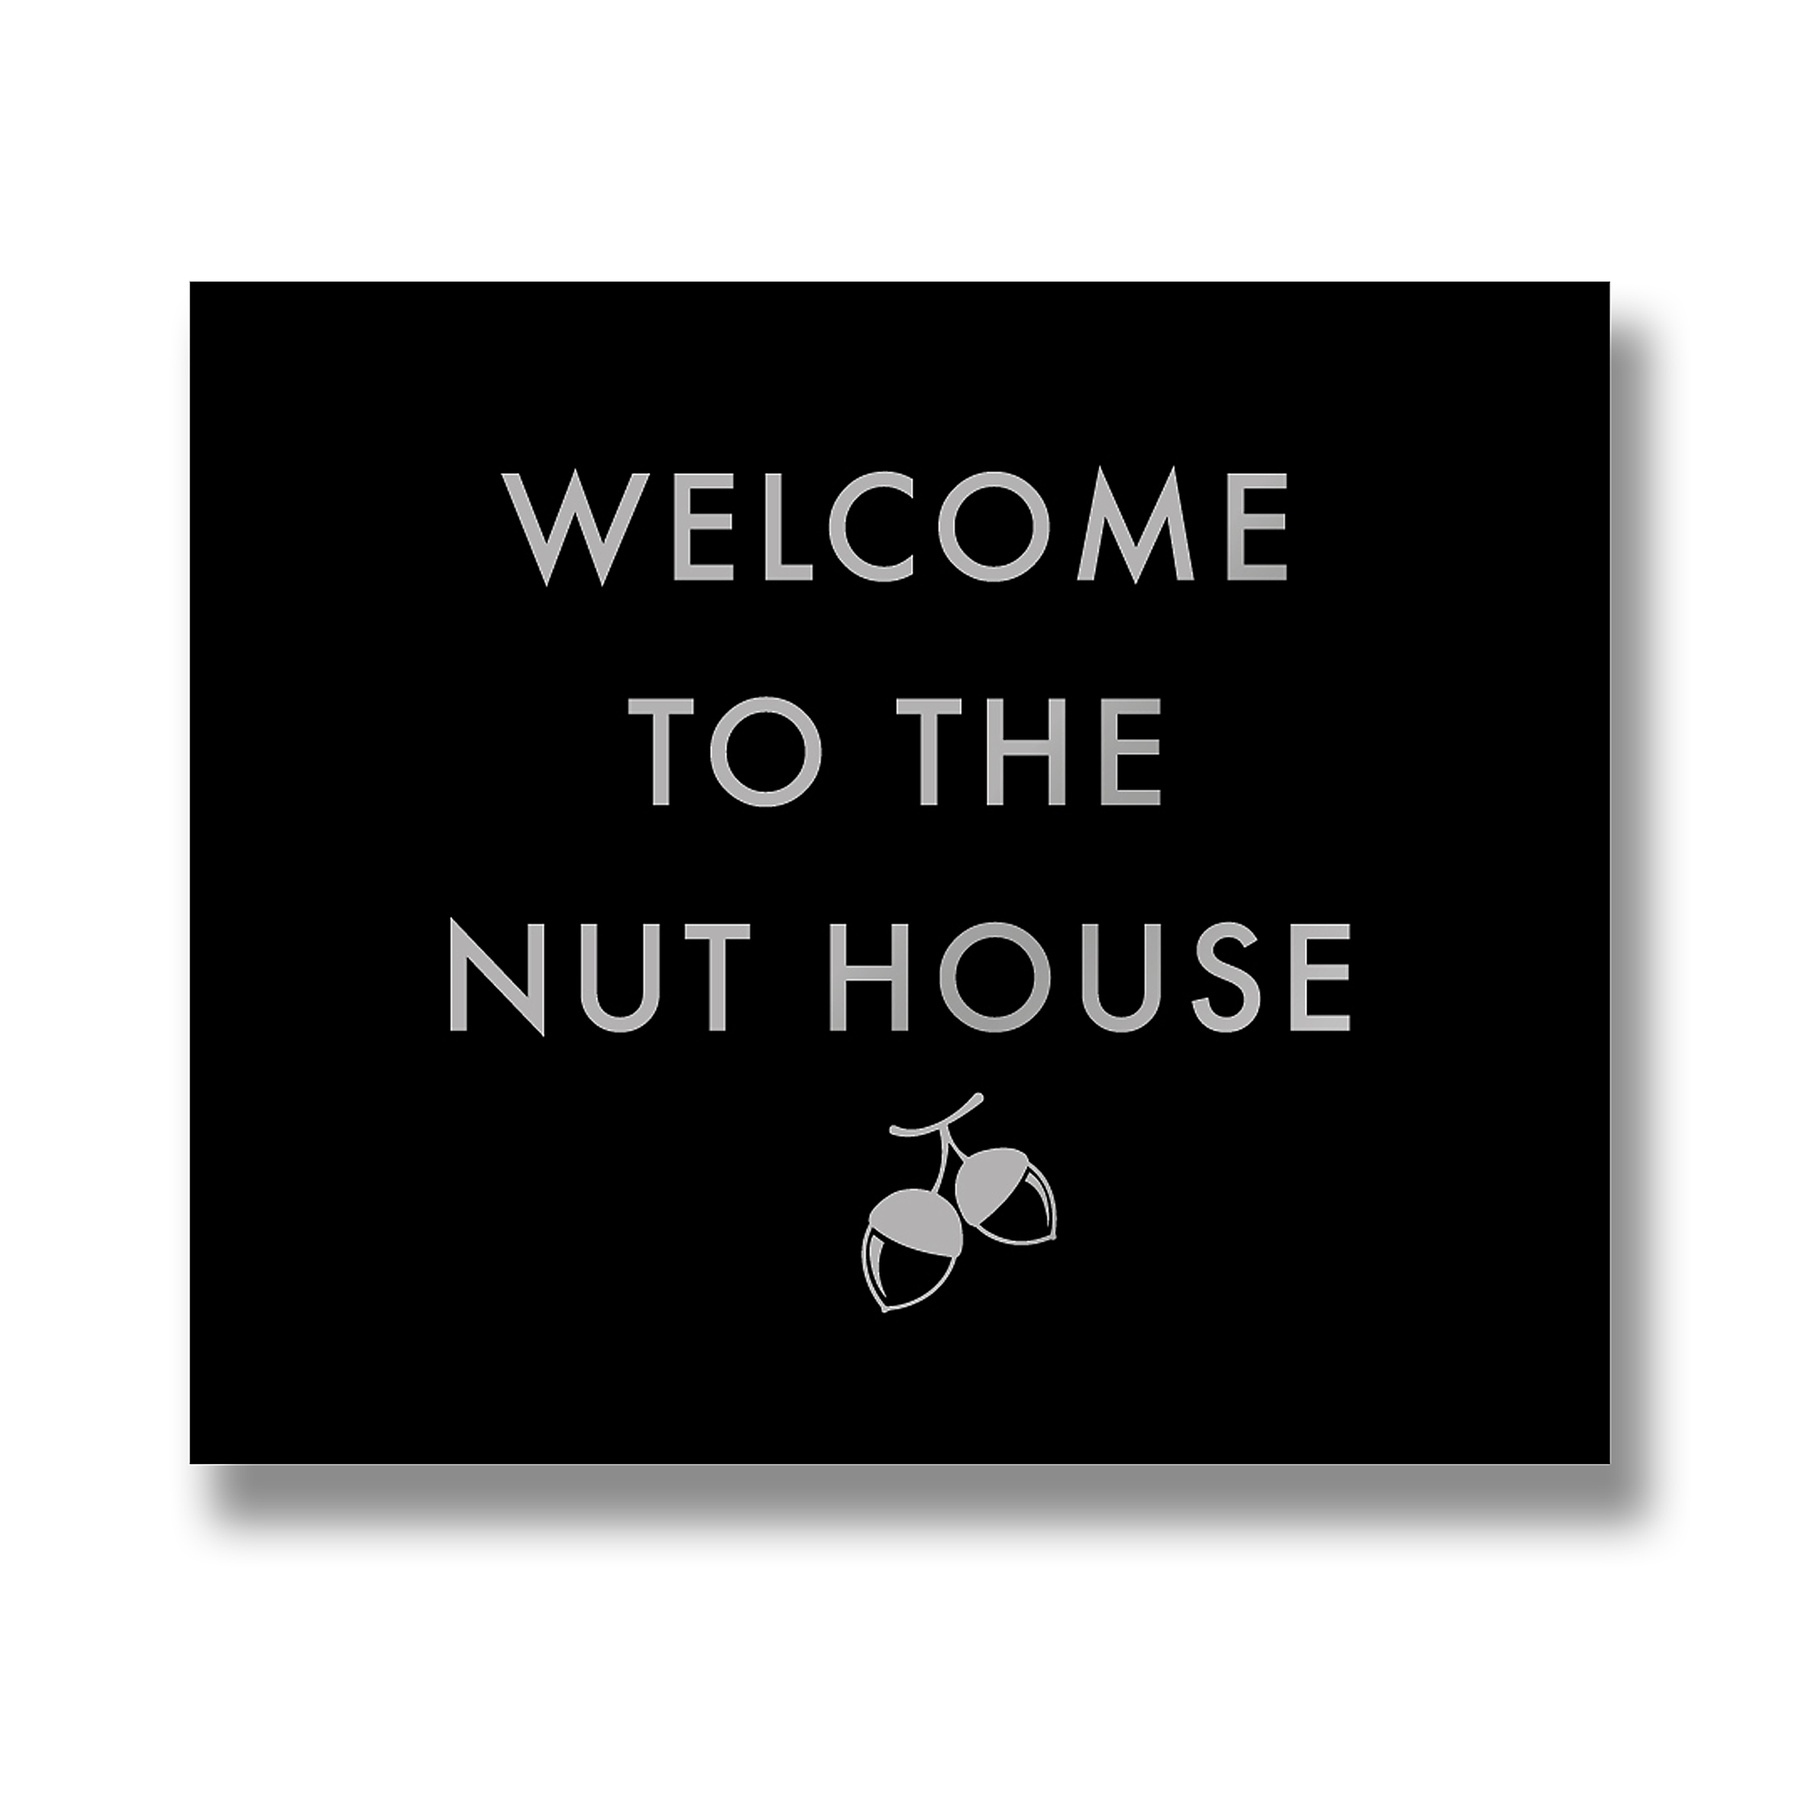 Welcome To The Nut House Metallic Detail Plaque - Image 1